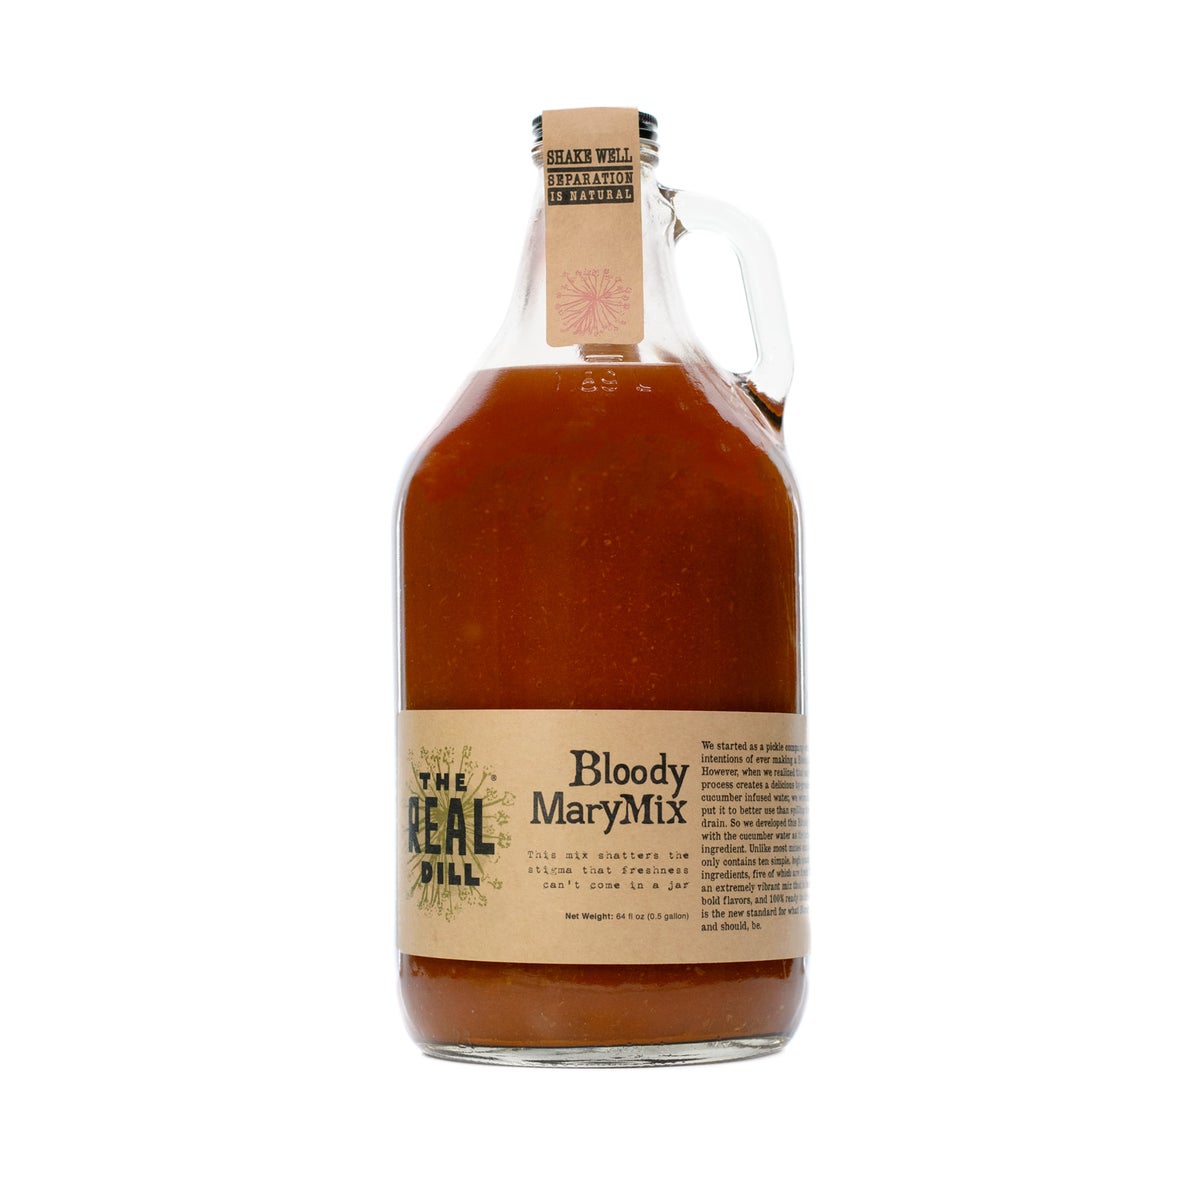 THE REAL DILL - BLOODY MARY MIX - GROWLER